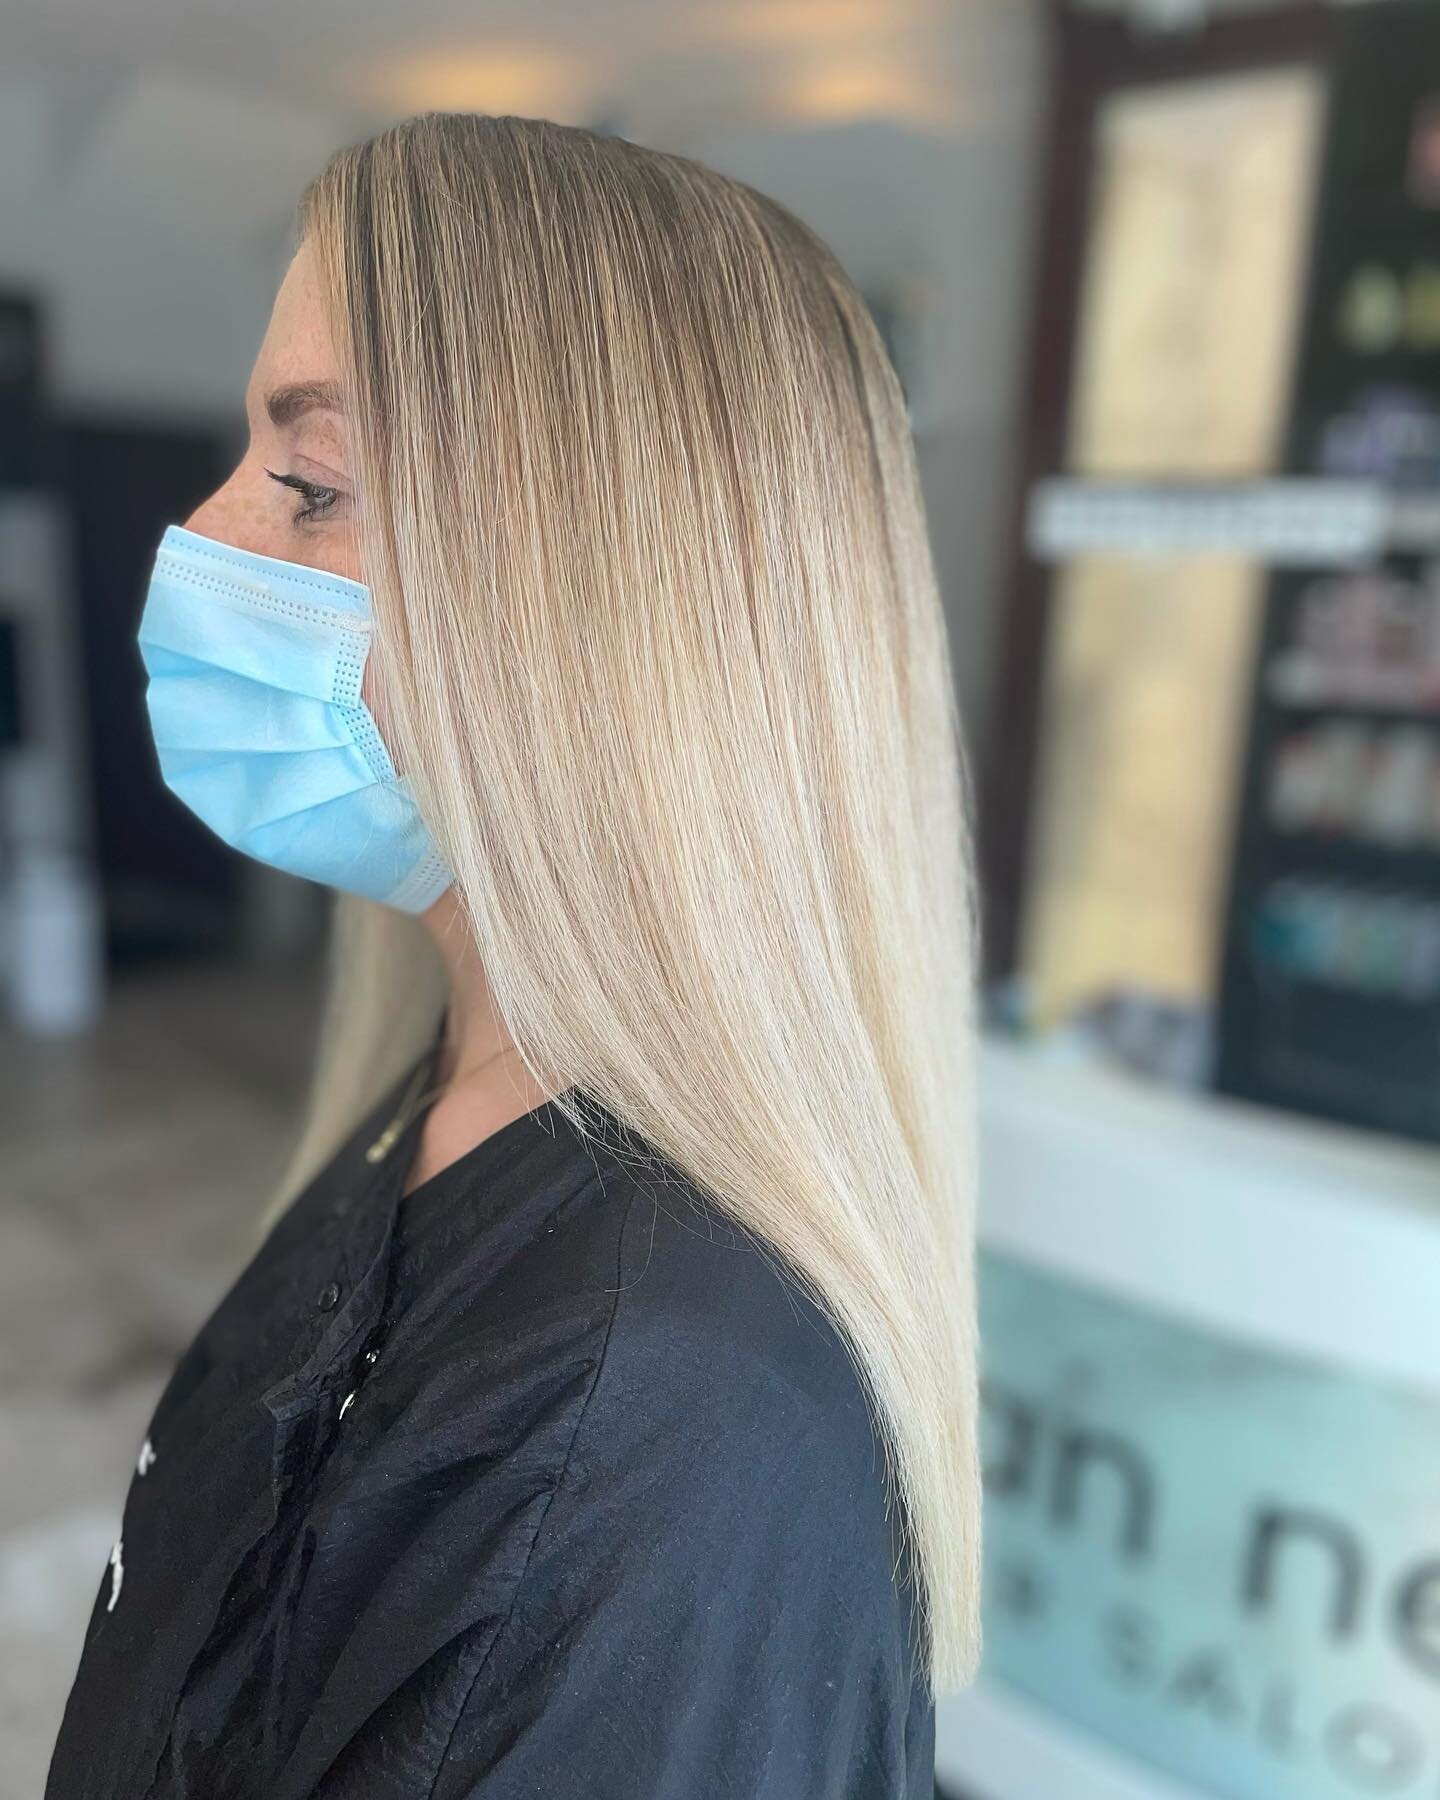 Gorgeous cool blonde transformation created by Aime&eacute; for our fabulous client yesterday 💇🏼&zwj;♀️

Swipe for before ➡️